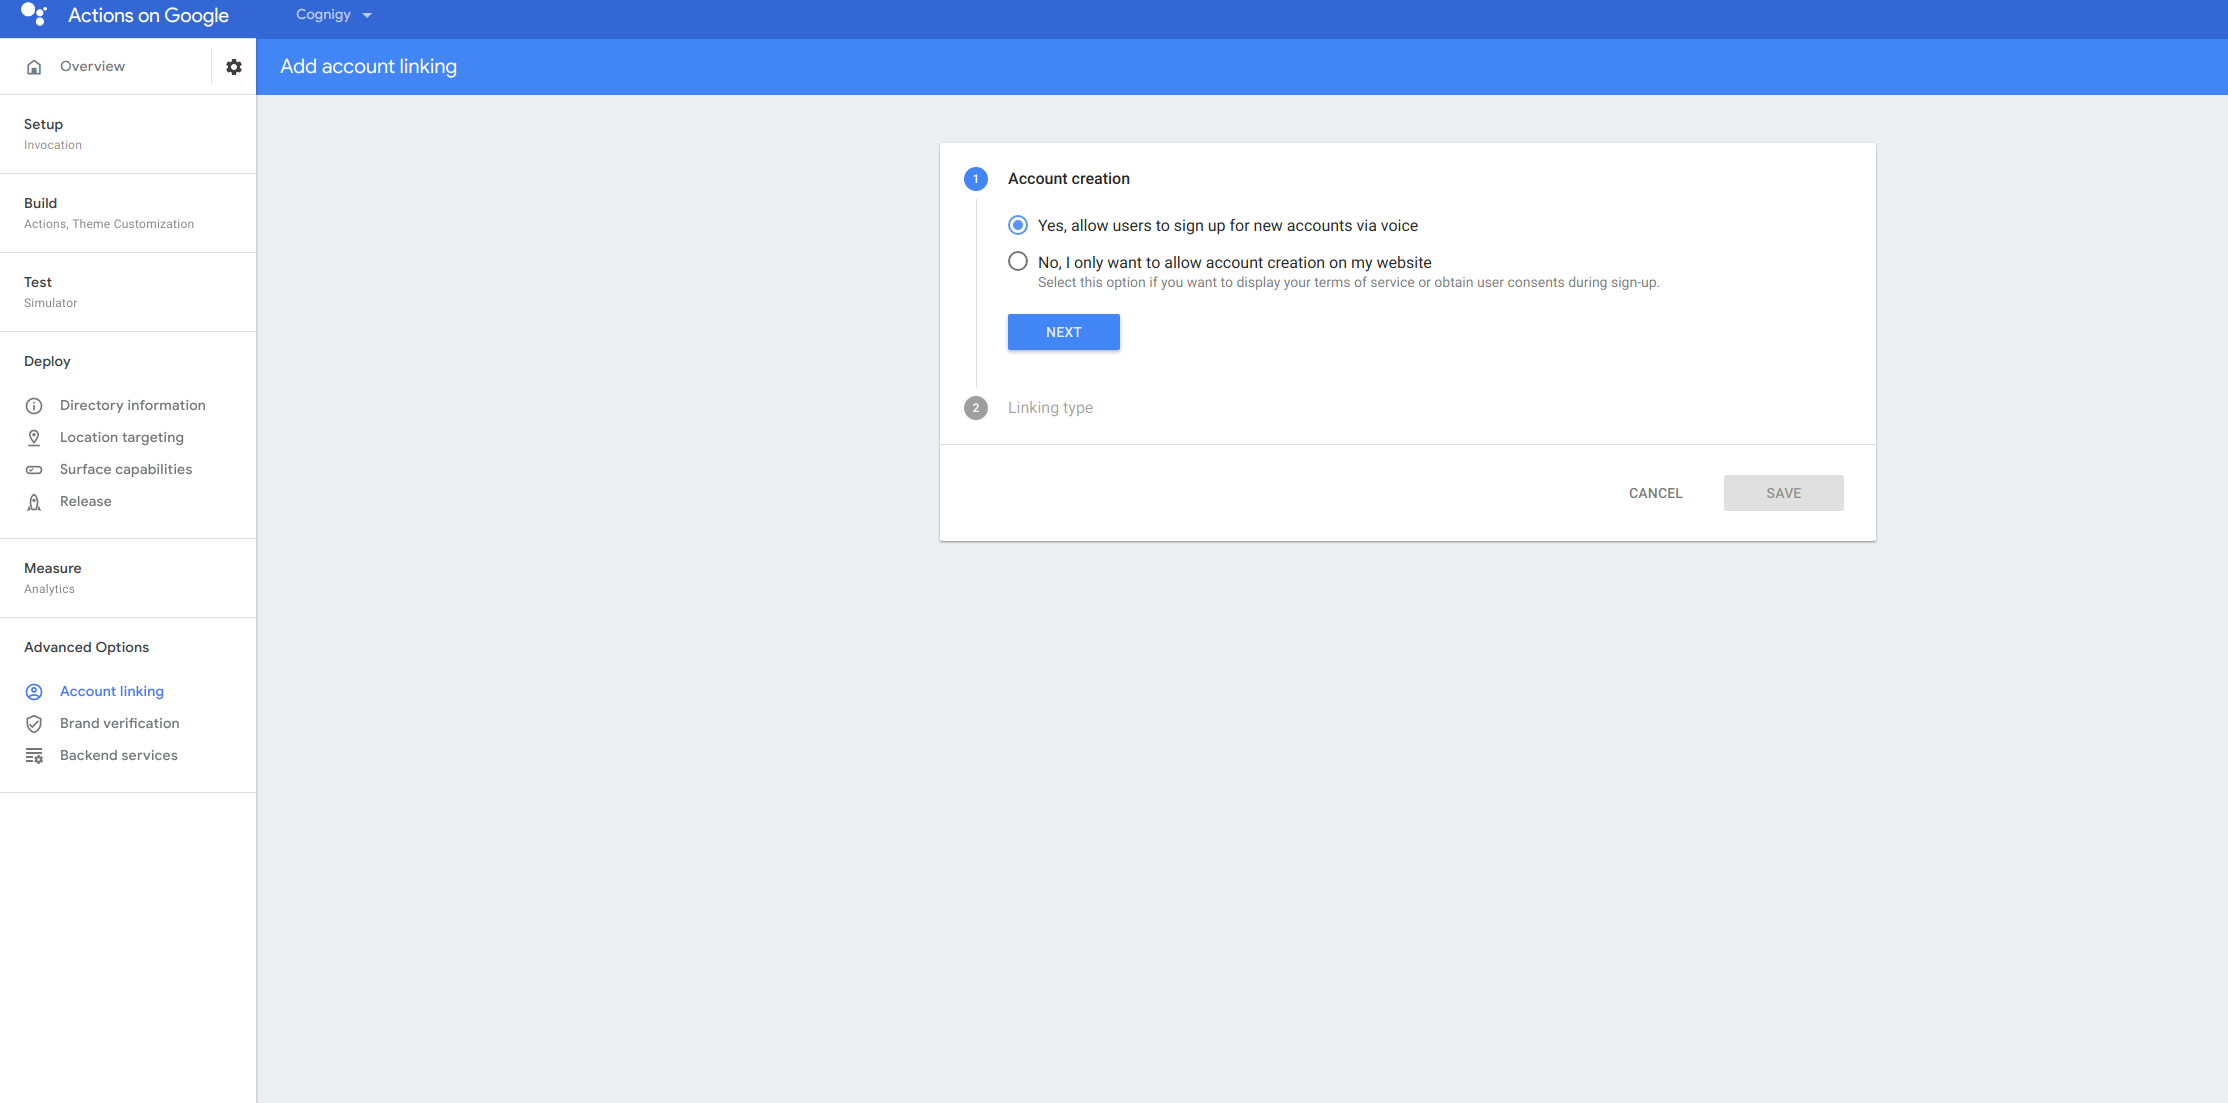 Figure: Activating Account Linking in the Google Actions Console